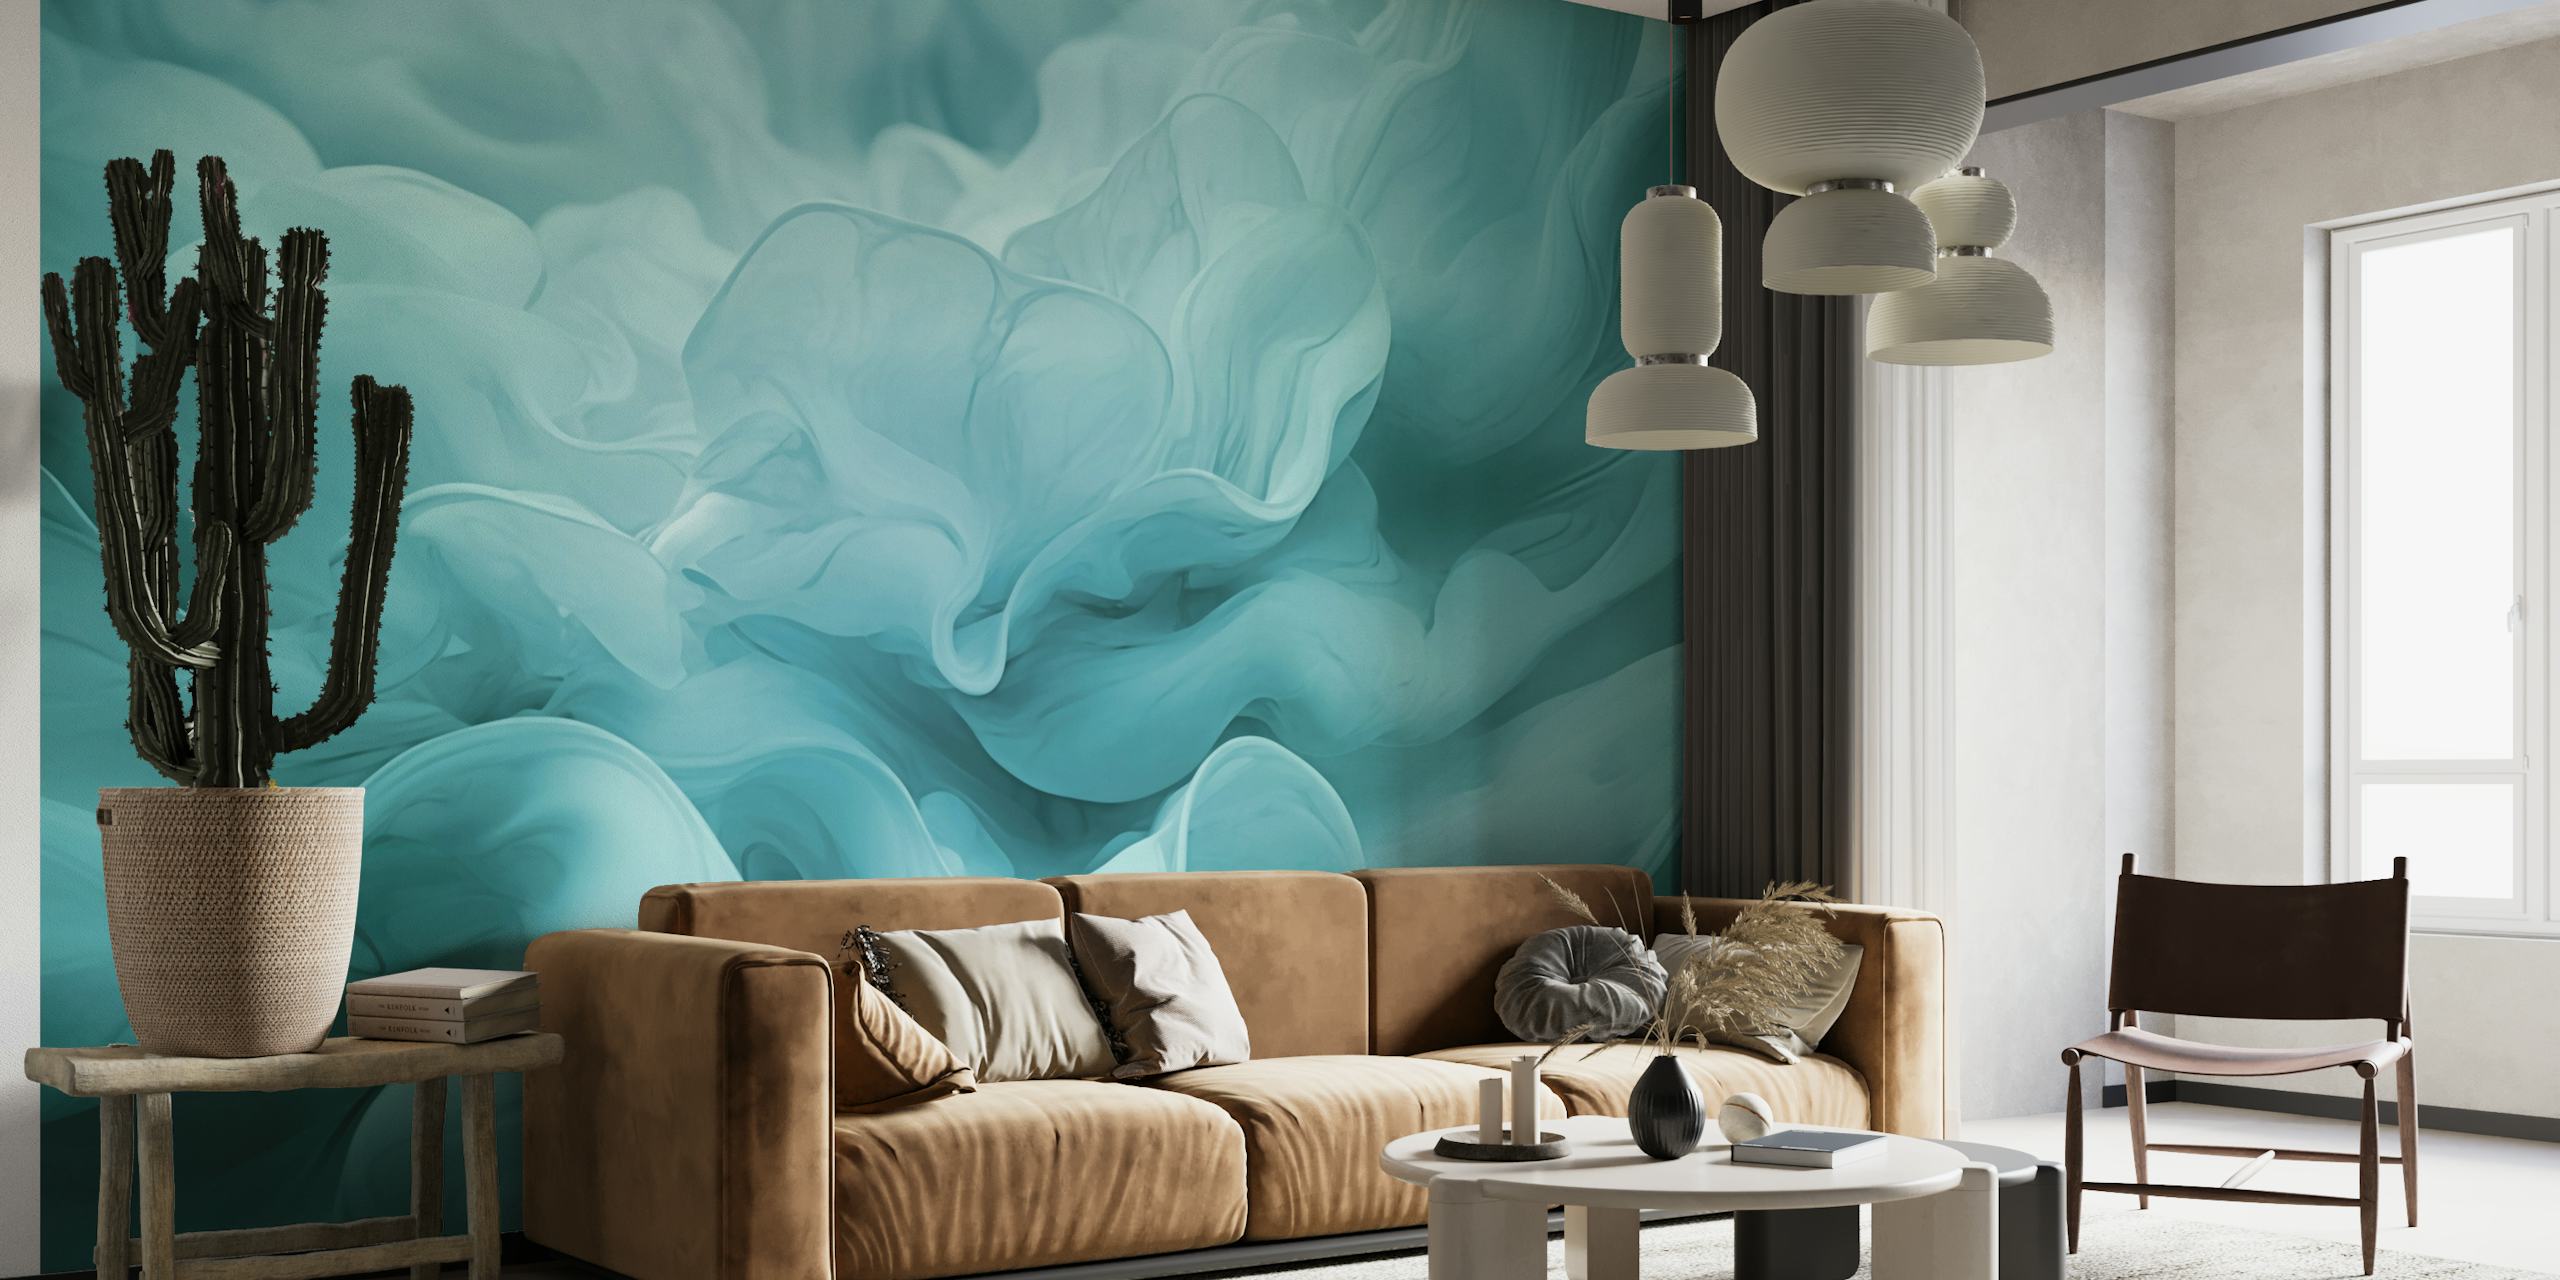 Ethereal Fluid Dreams Pastel Turquoise wallpaper